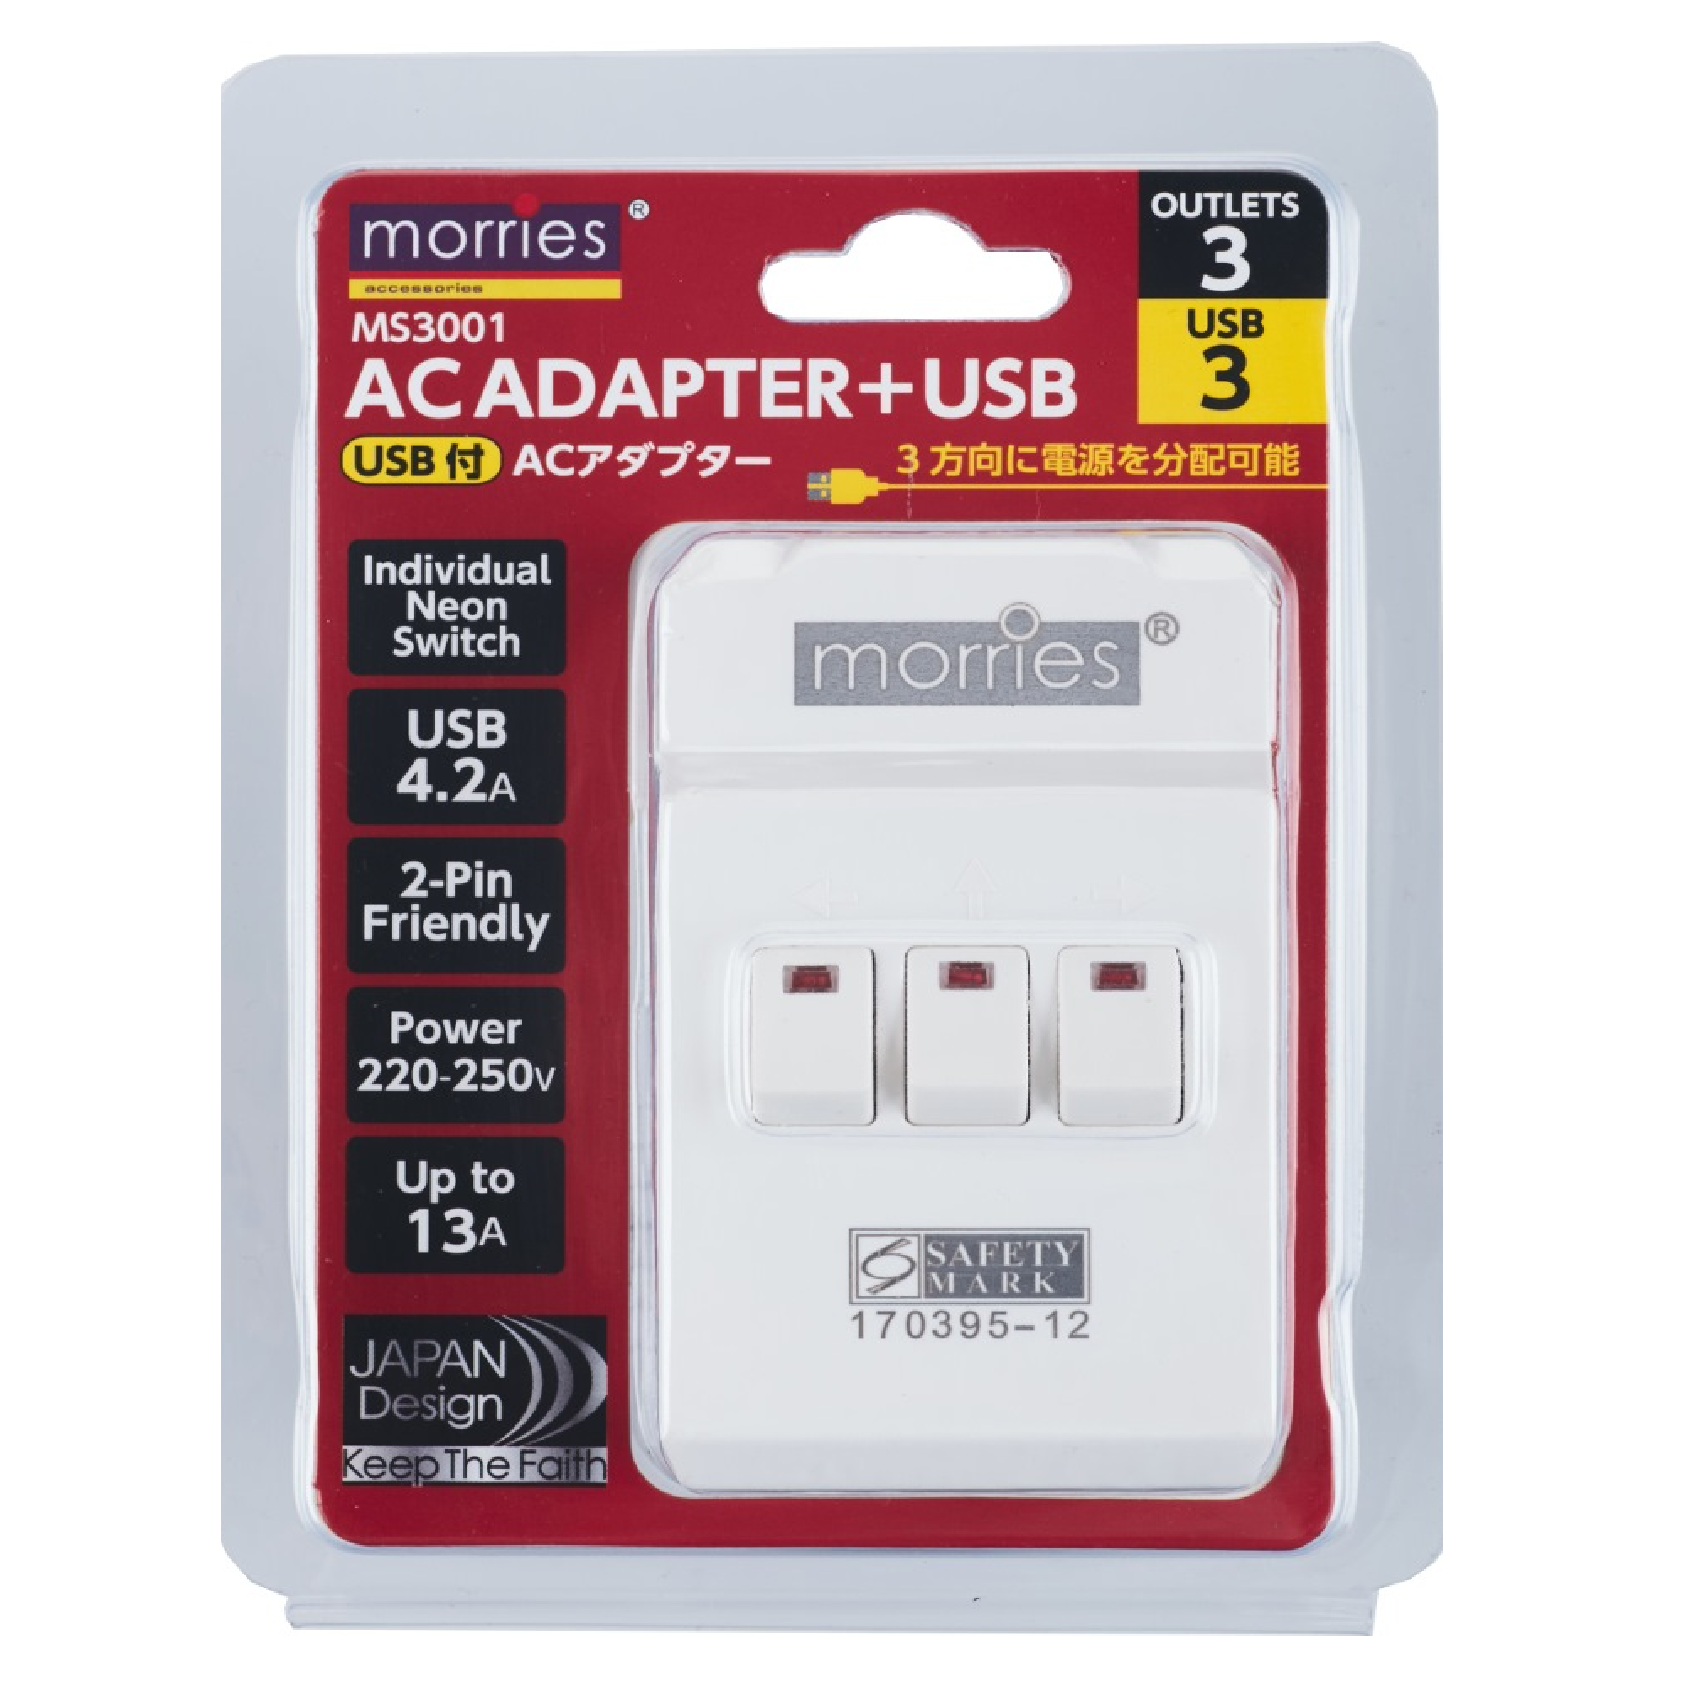 Morries 3-WAY ADAPTOR With SWITCH Plus 3 USB PORT (4.2A) MS3001